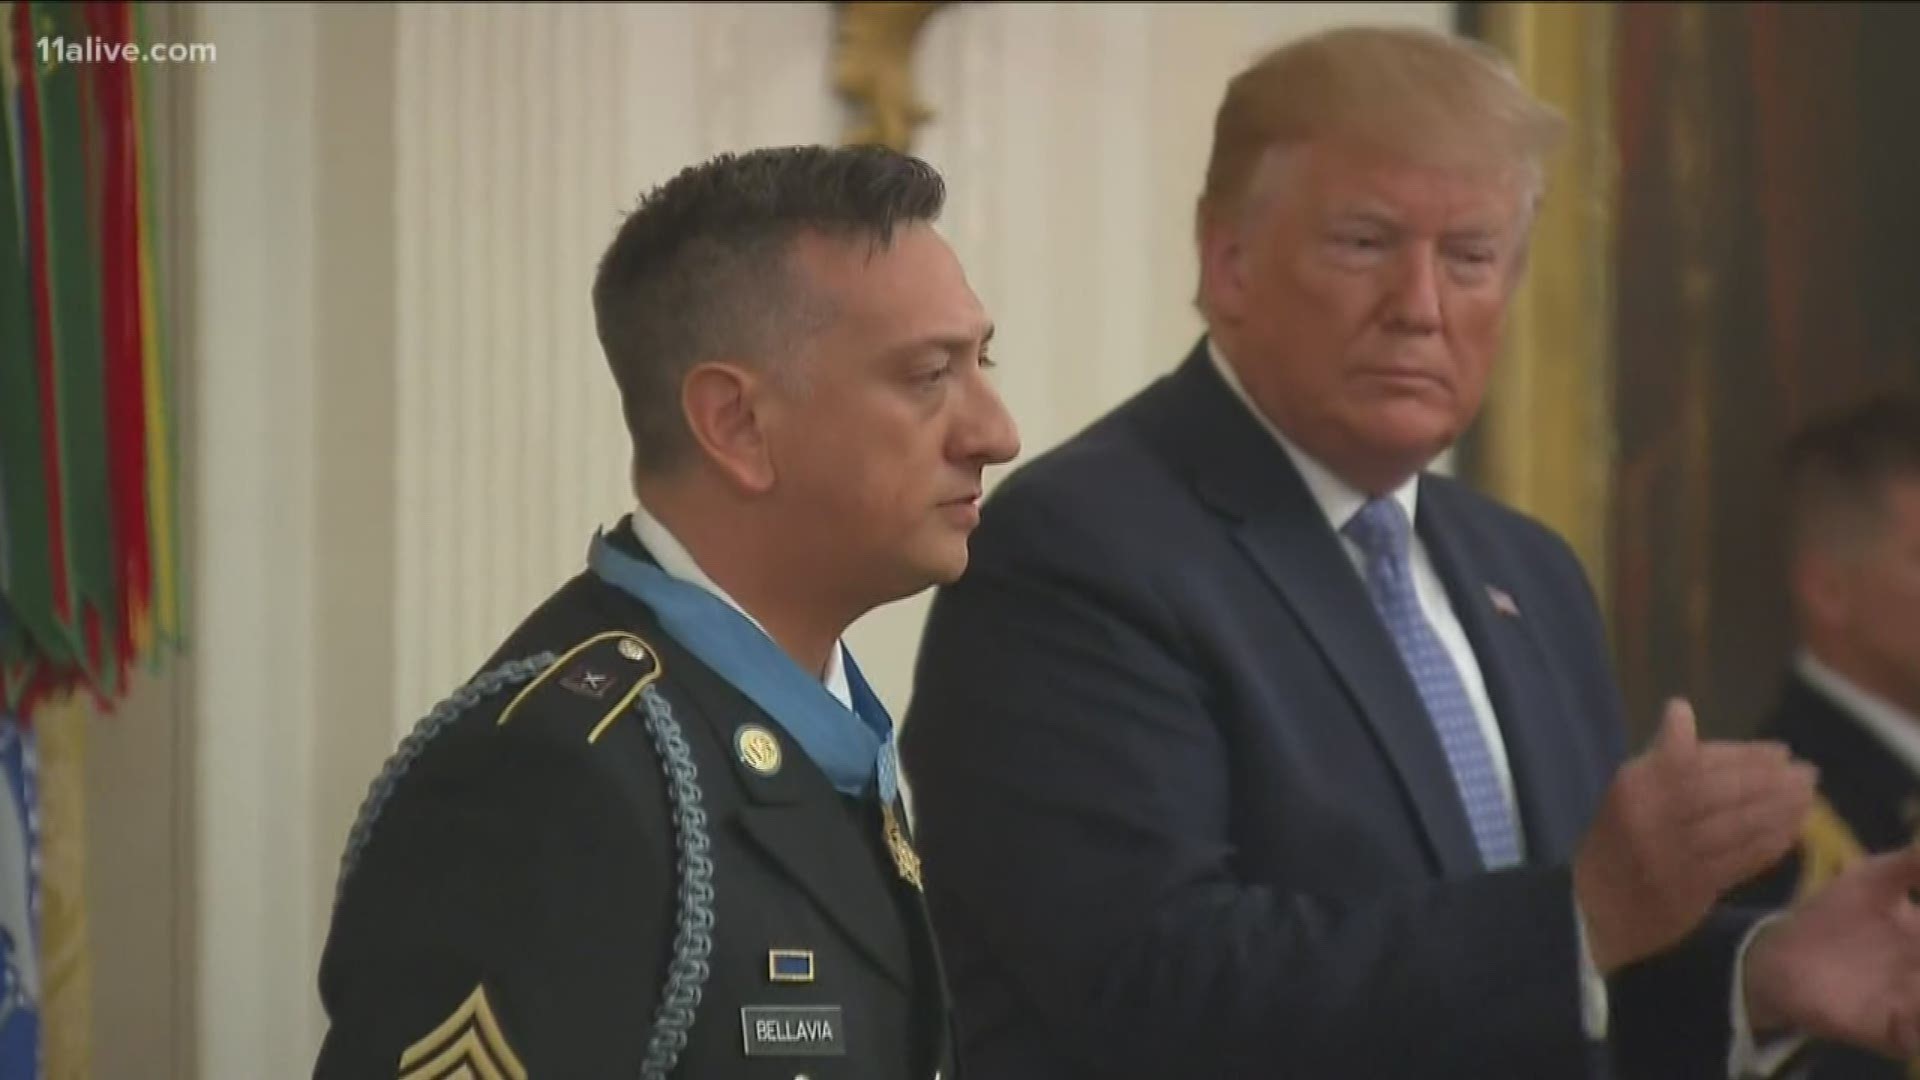 President Trump presented him with the award.